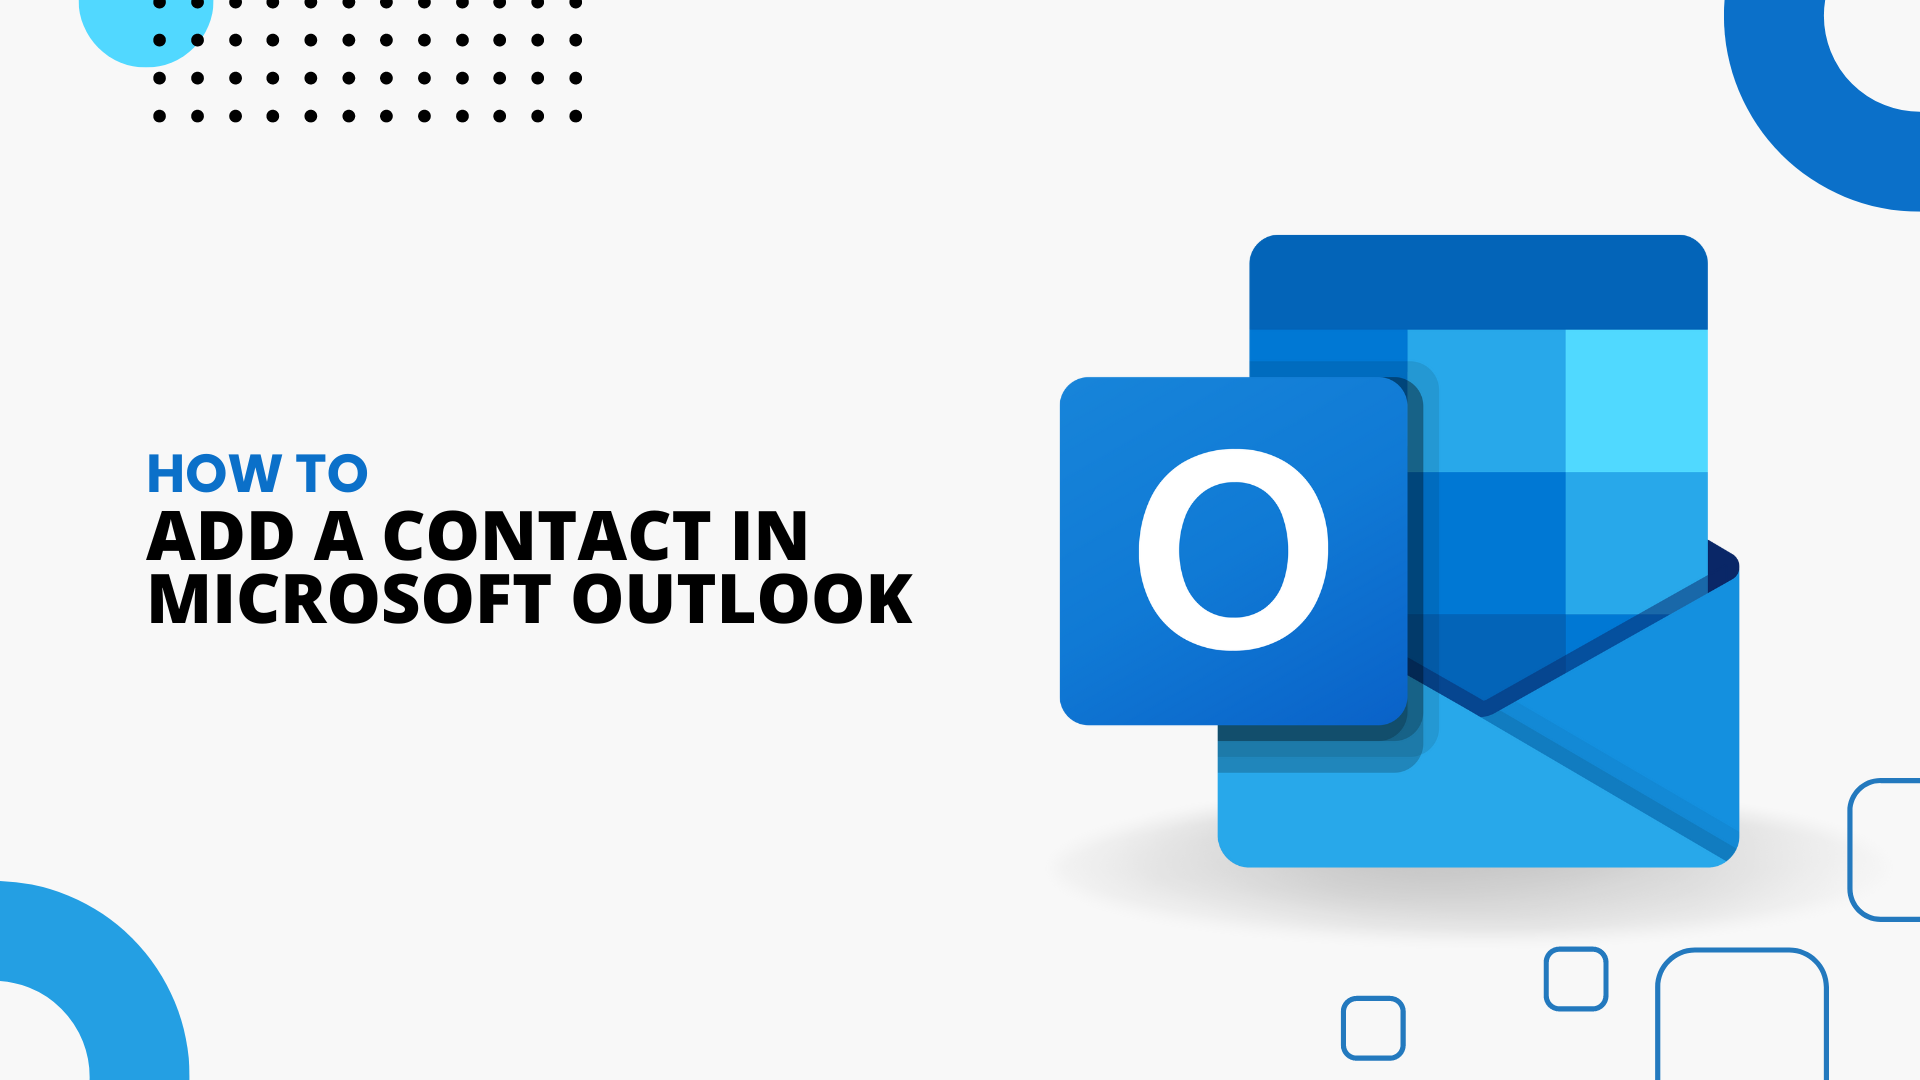 Add a Contact in Microsoft Outlook